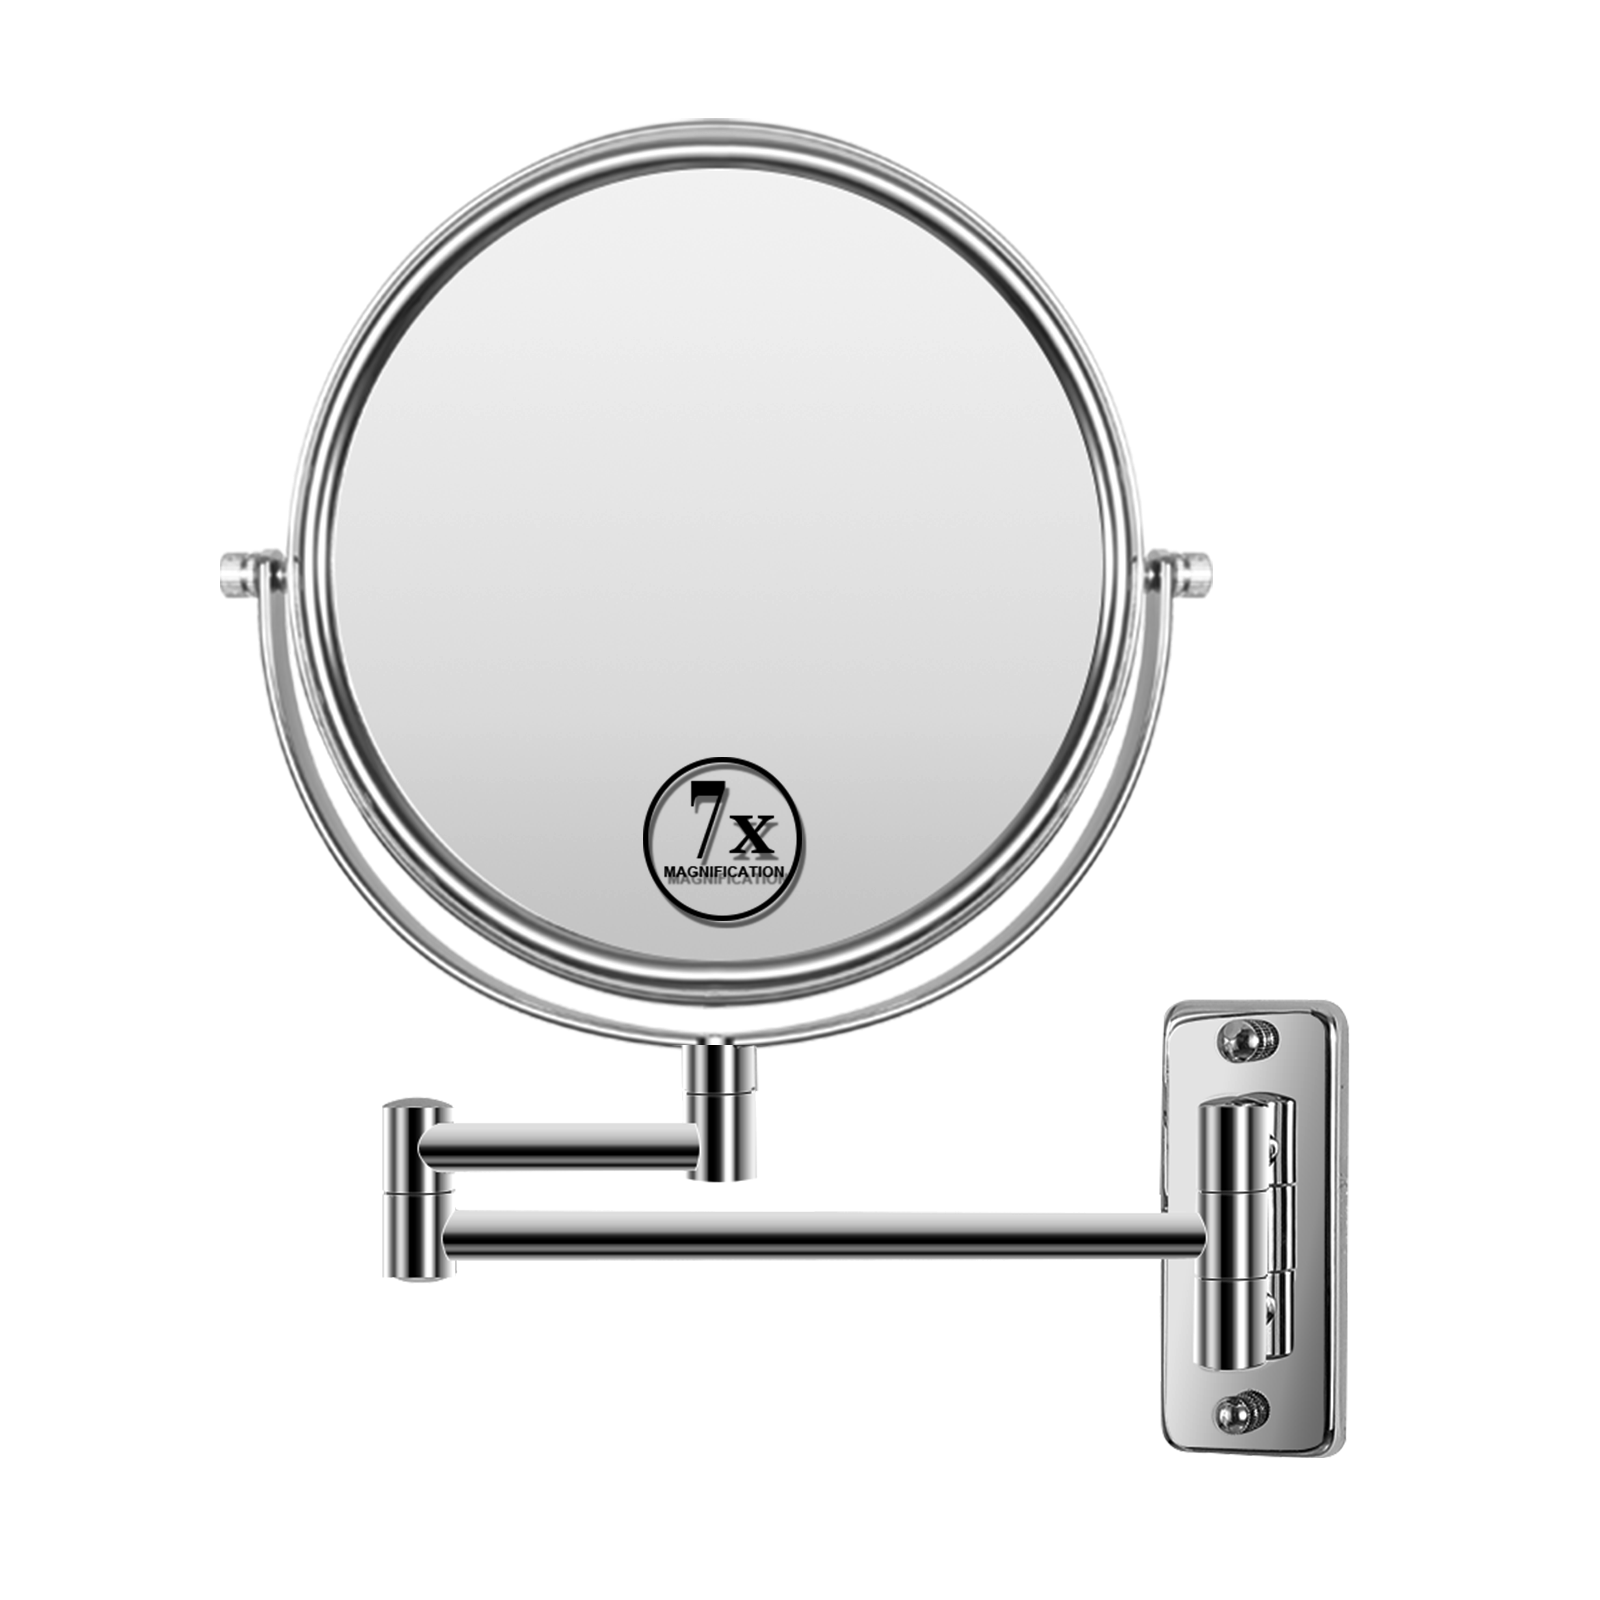 8-inch Wall Mounted Makeup Vanity Mirror, 1X / 7X Magnification Mirror, 360° Swivel with Extension Arm (Chrome Finish)